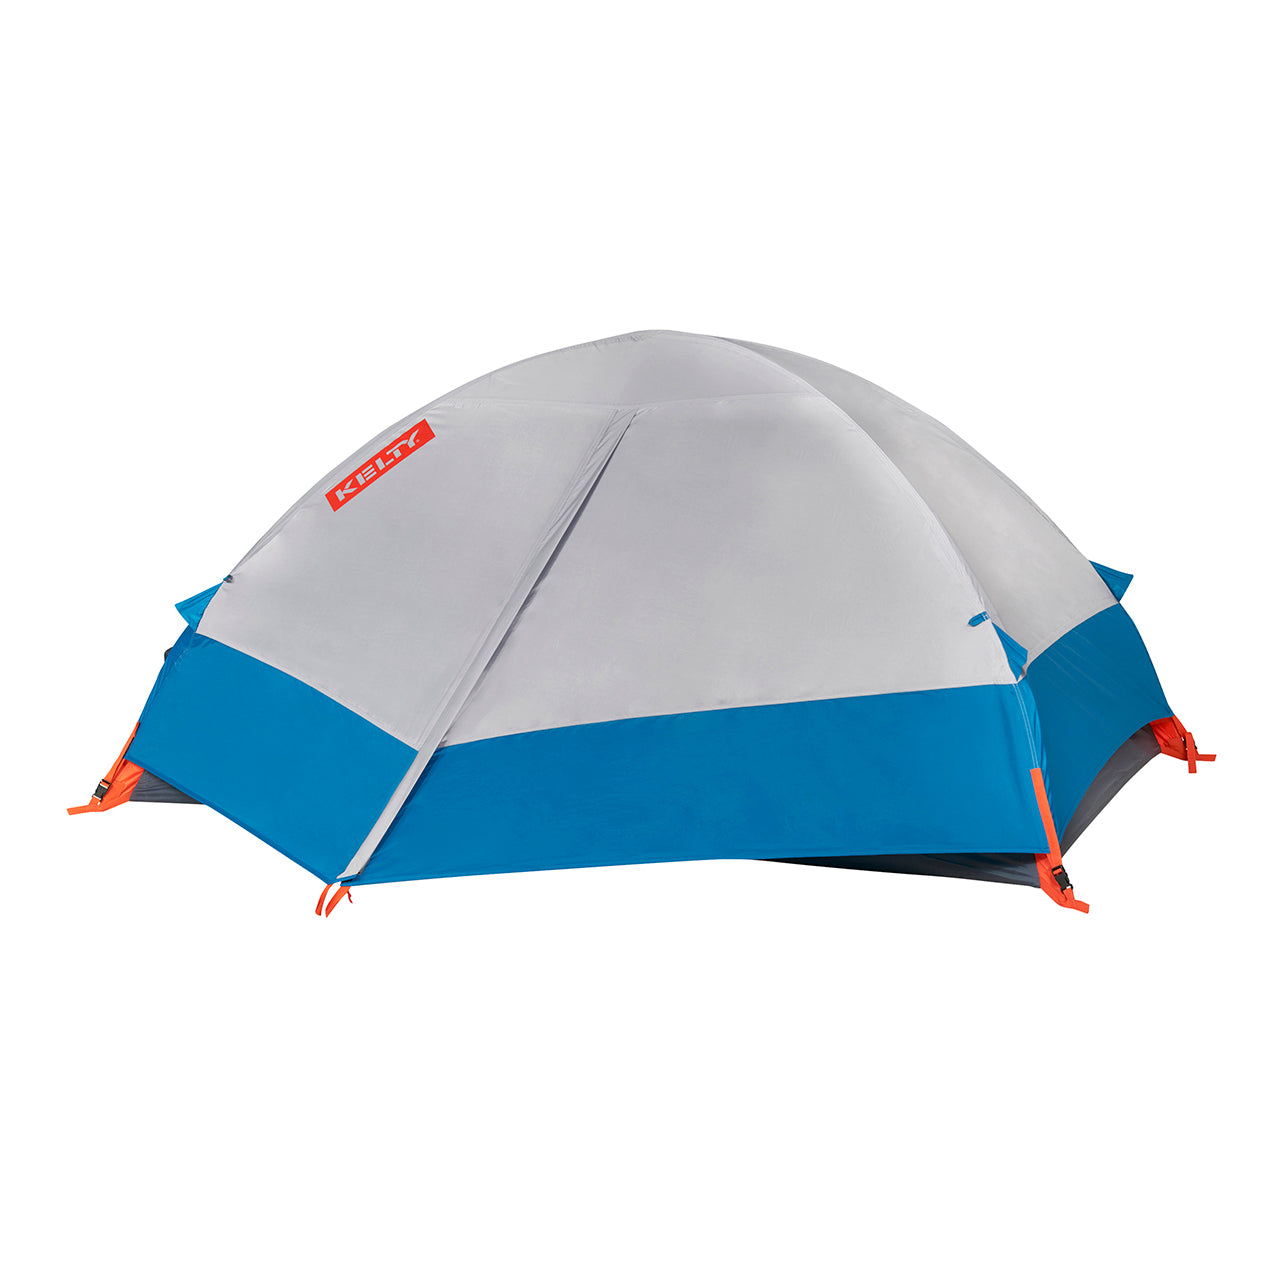 kelty late start 2 person tent with fly on and closed in color light grey and blue with orange accents